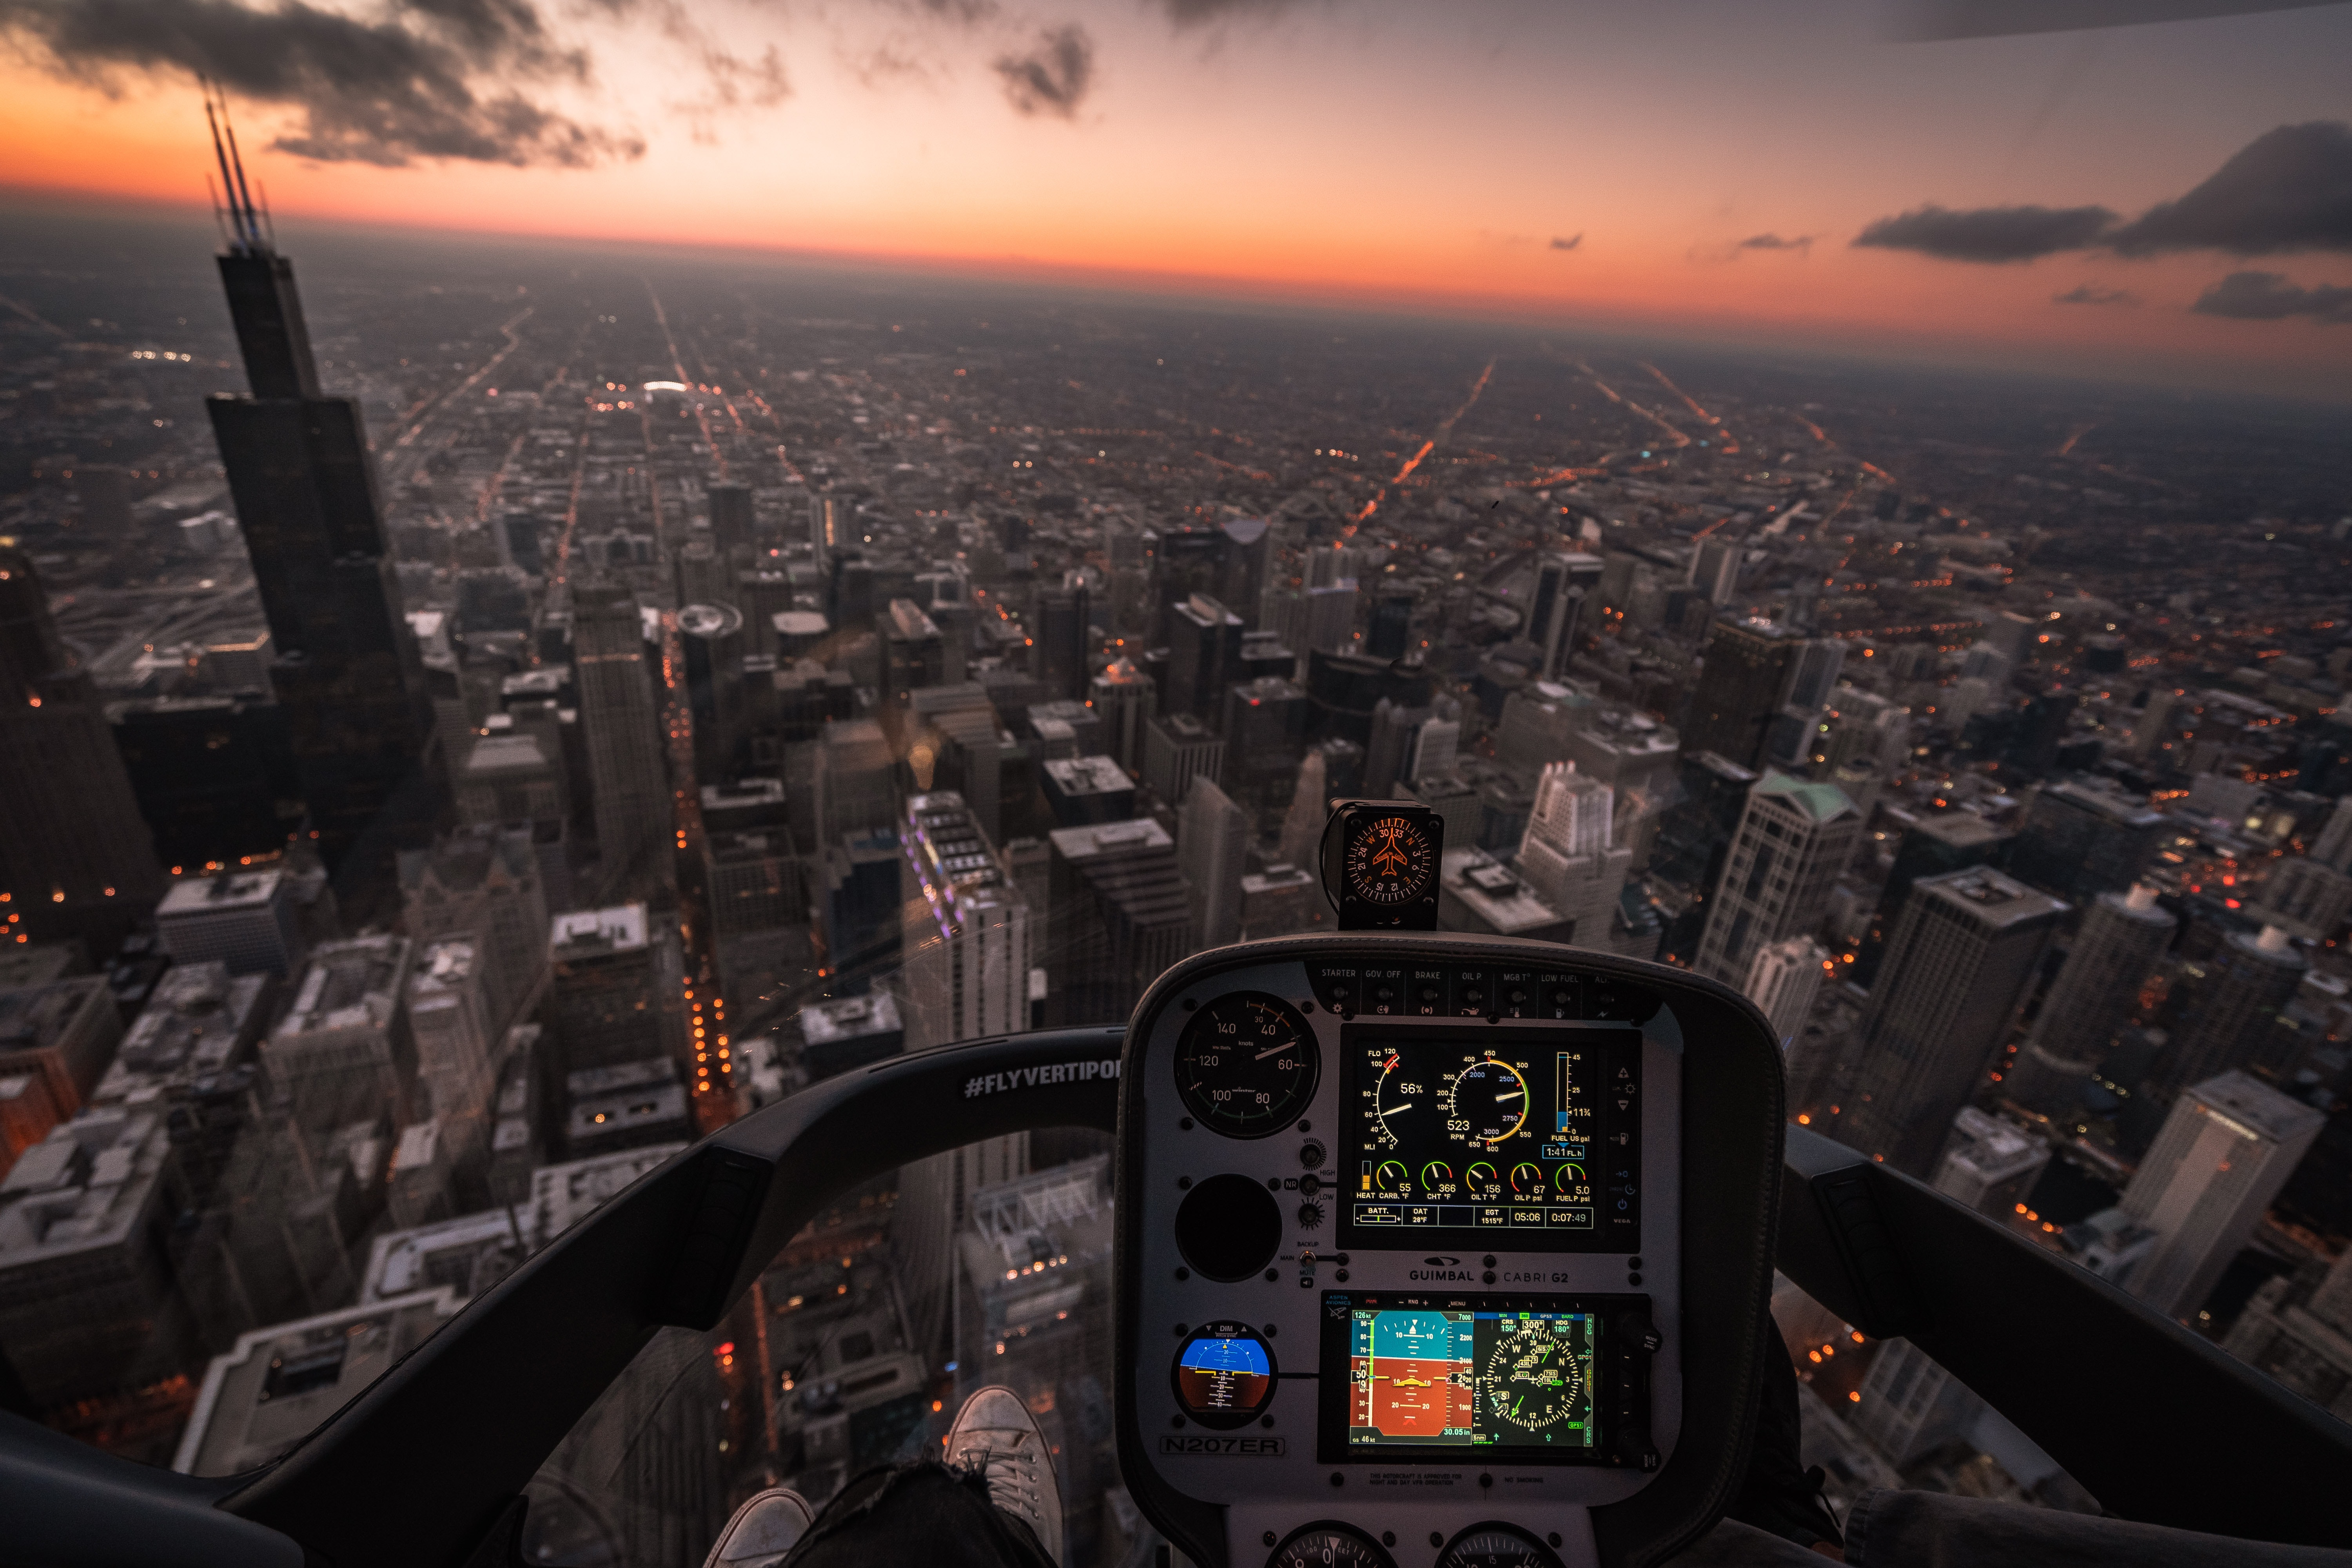 aviation, cockpit, flight, airplanes, cities, city, view from above, control, management